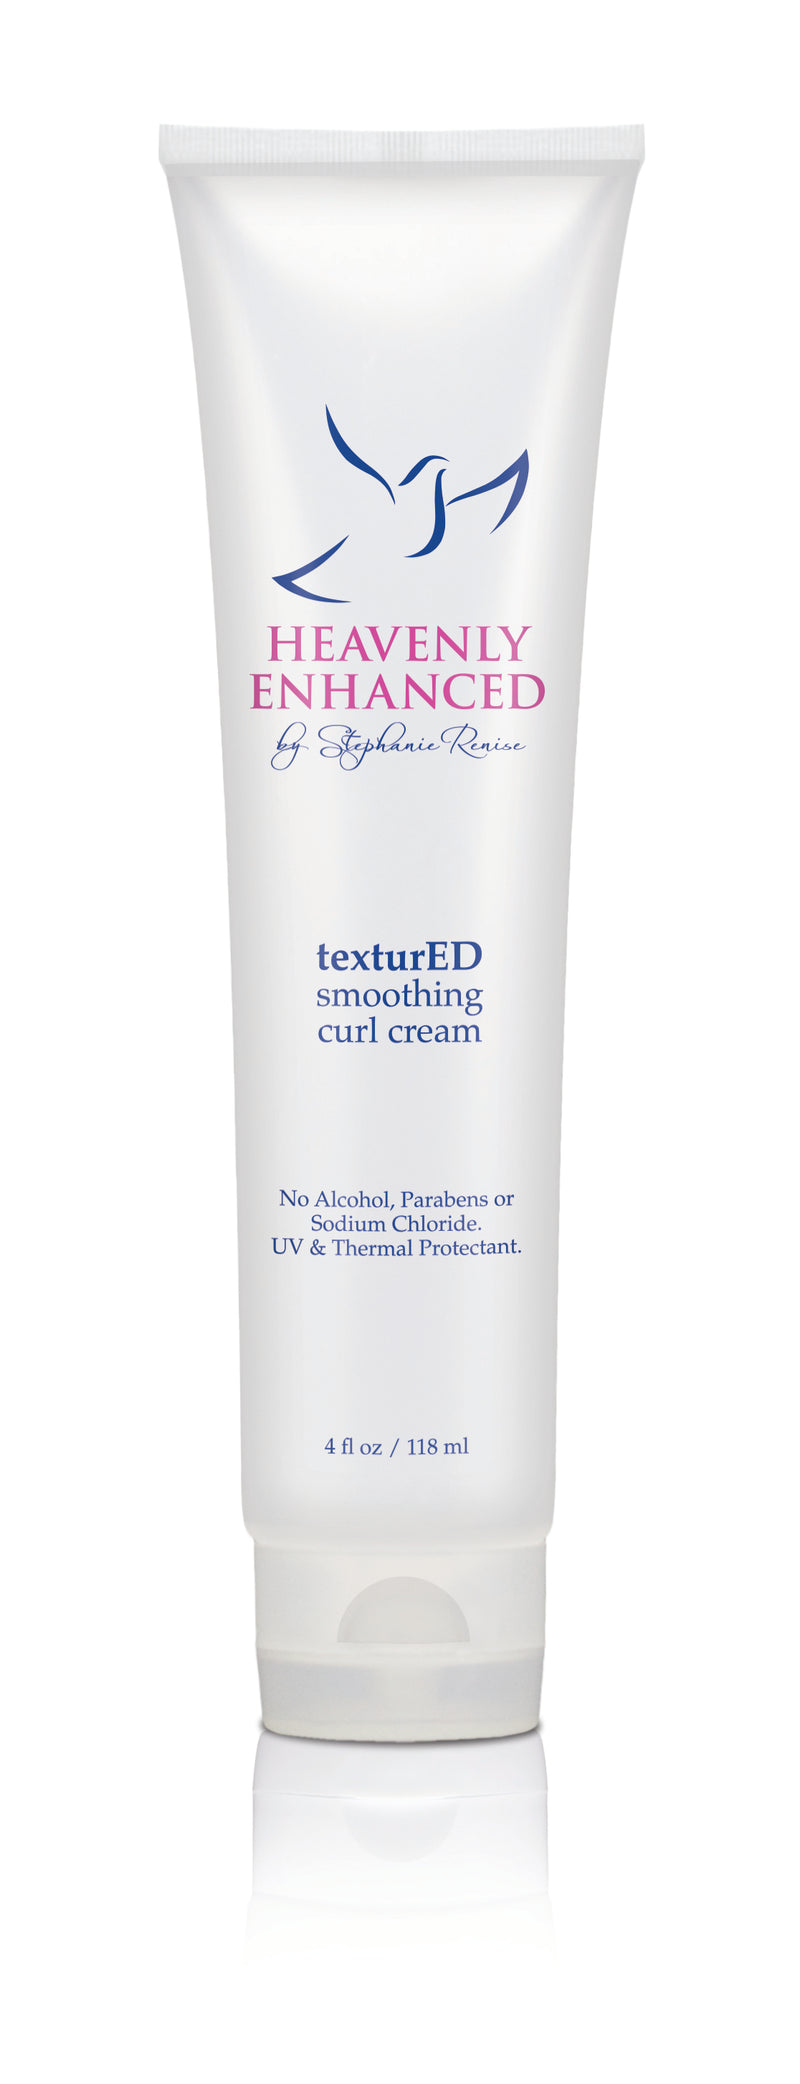 texturED - smoothing curl cream